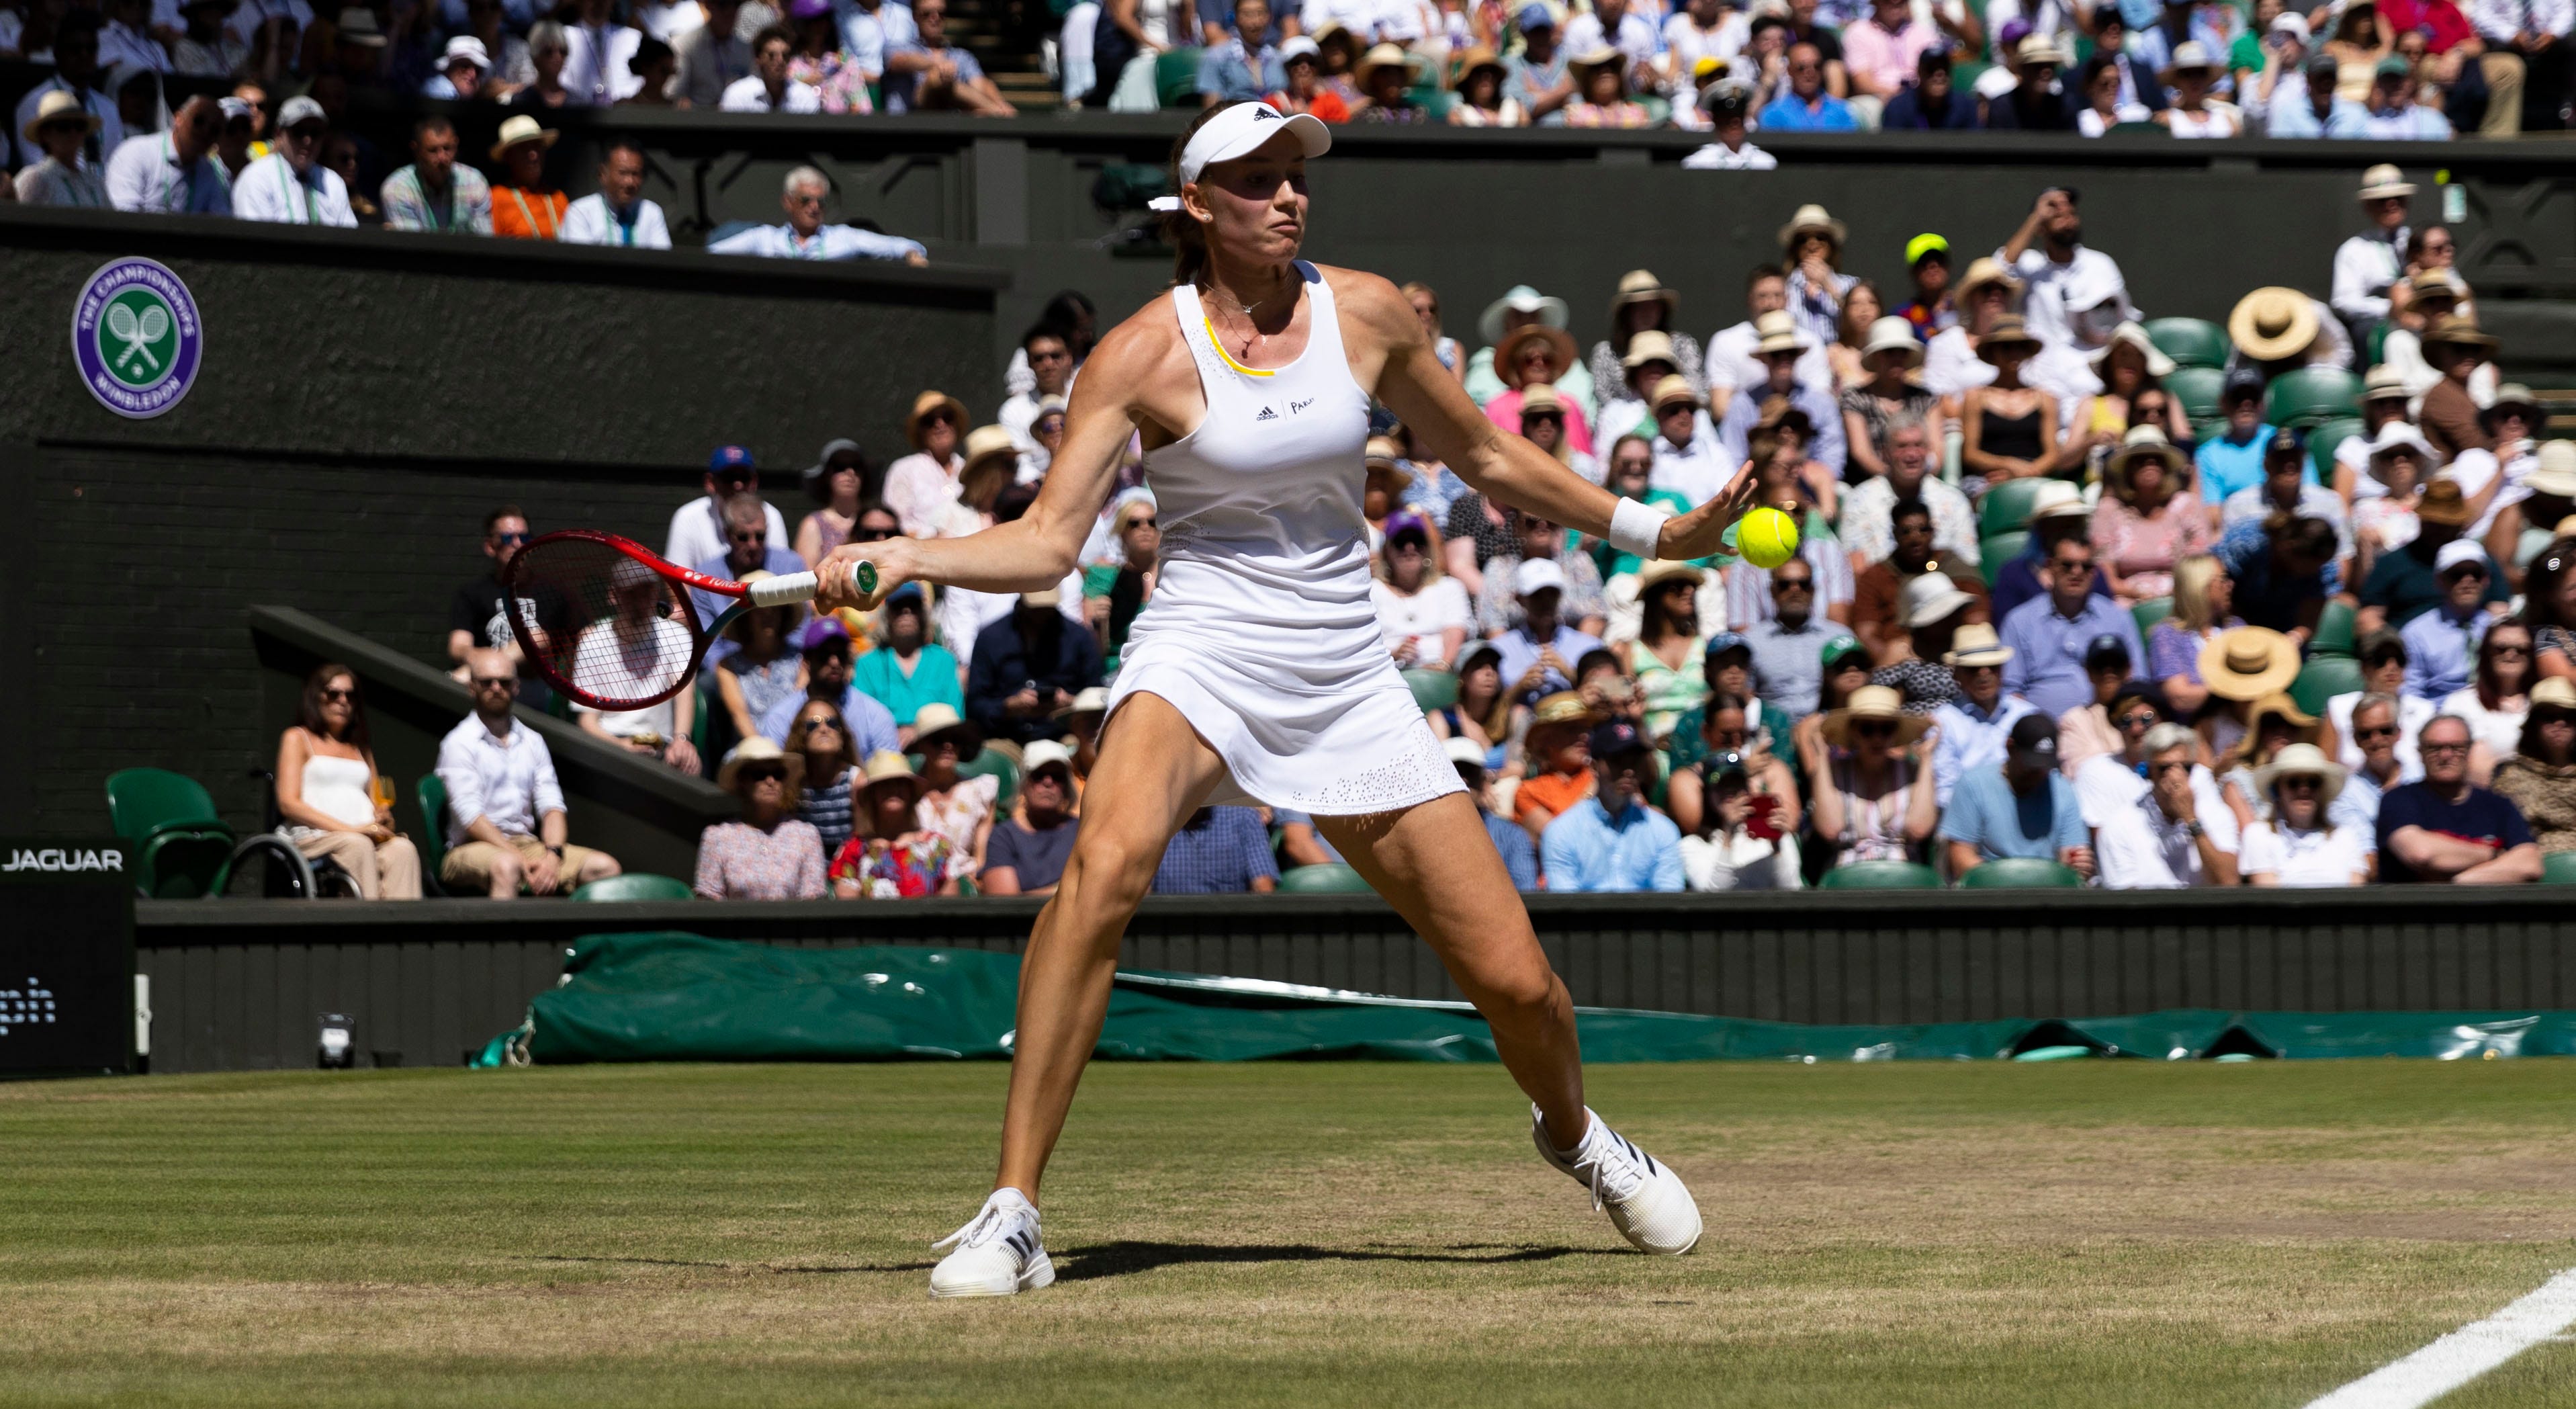 Wimbledon altering all-white underwear rule to be more considerate